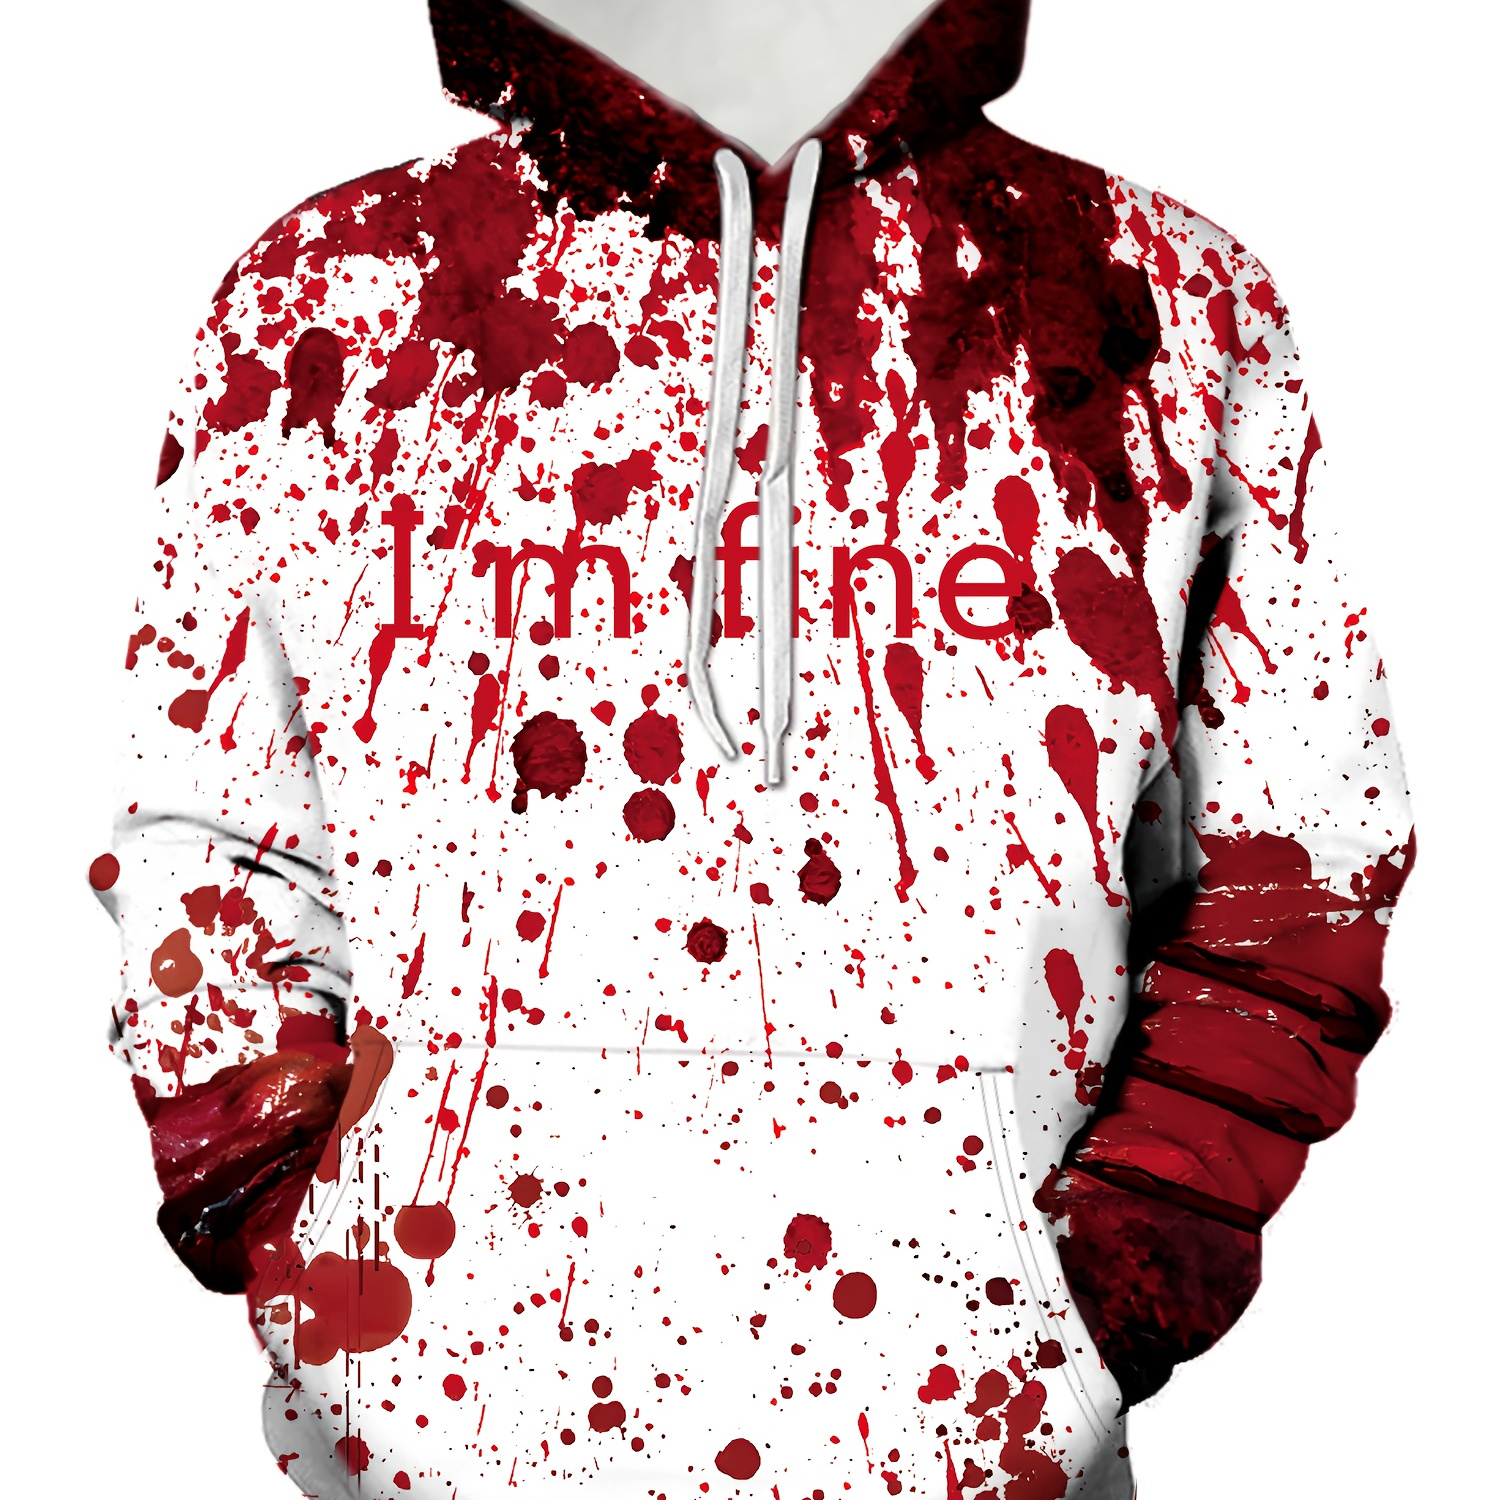 

Blood & I'm Fine Print Hoodie, Cool Hoodies For Men, Men's Casual Graphic Design Pullover Hooded Sweatshirt With Kangaroo Pocket Streetwear For Winter Fall, As Gifts